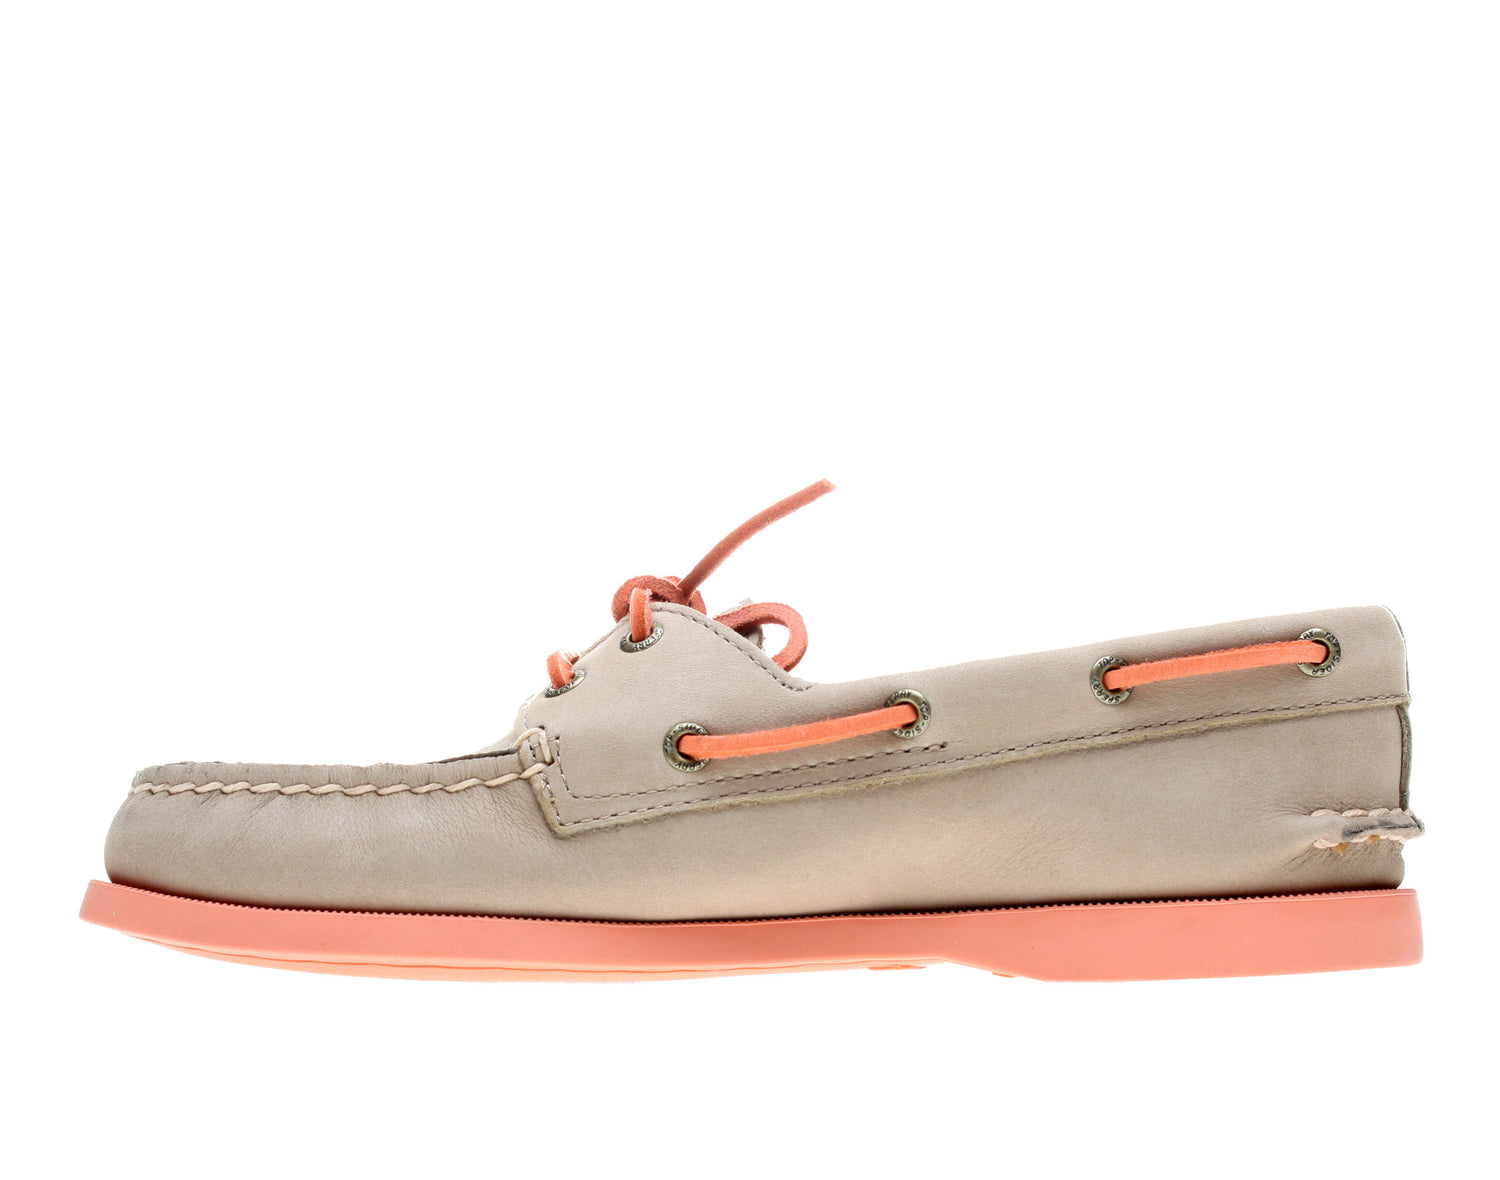 Sperry Top Sider Authentic Original Women's 2-Eye Boat Shoes